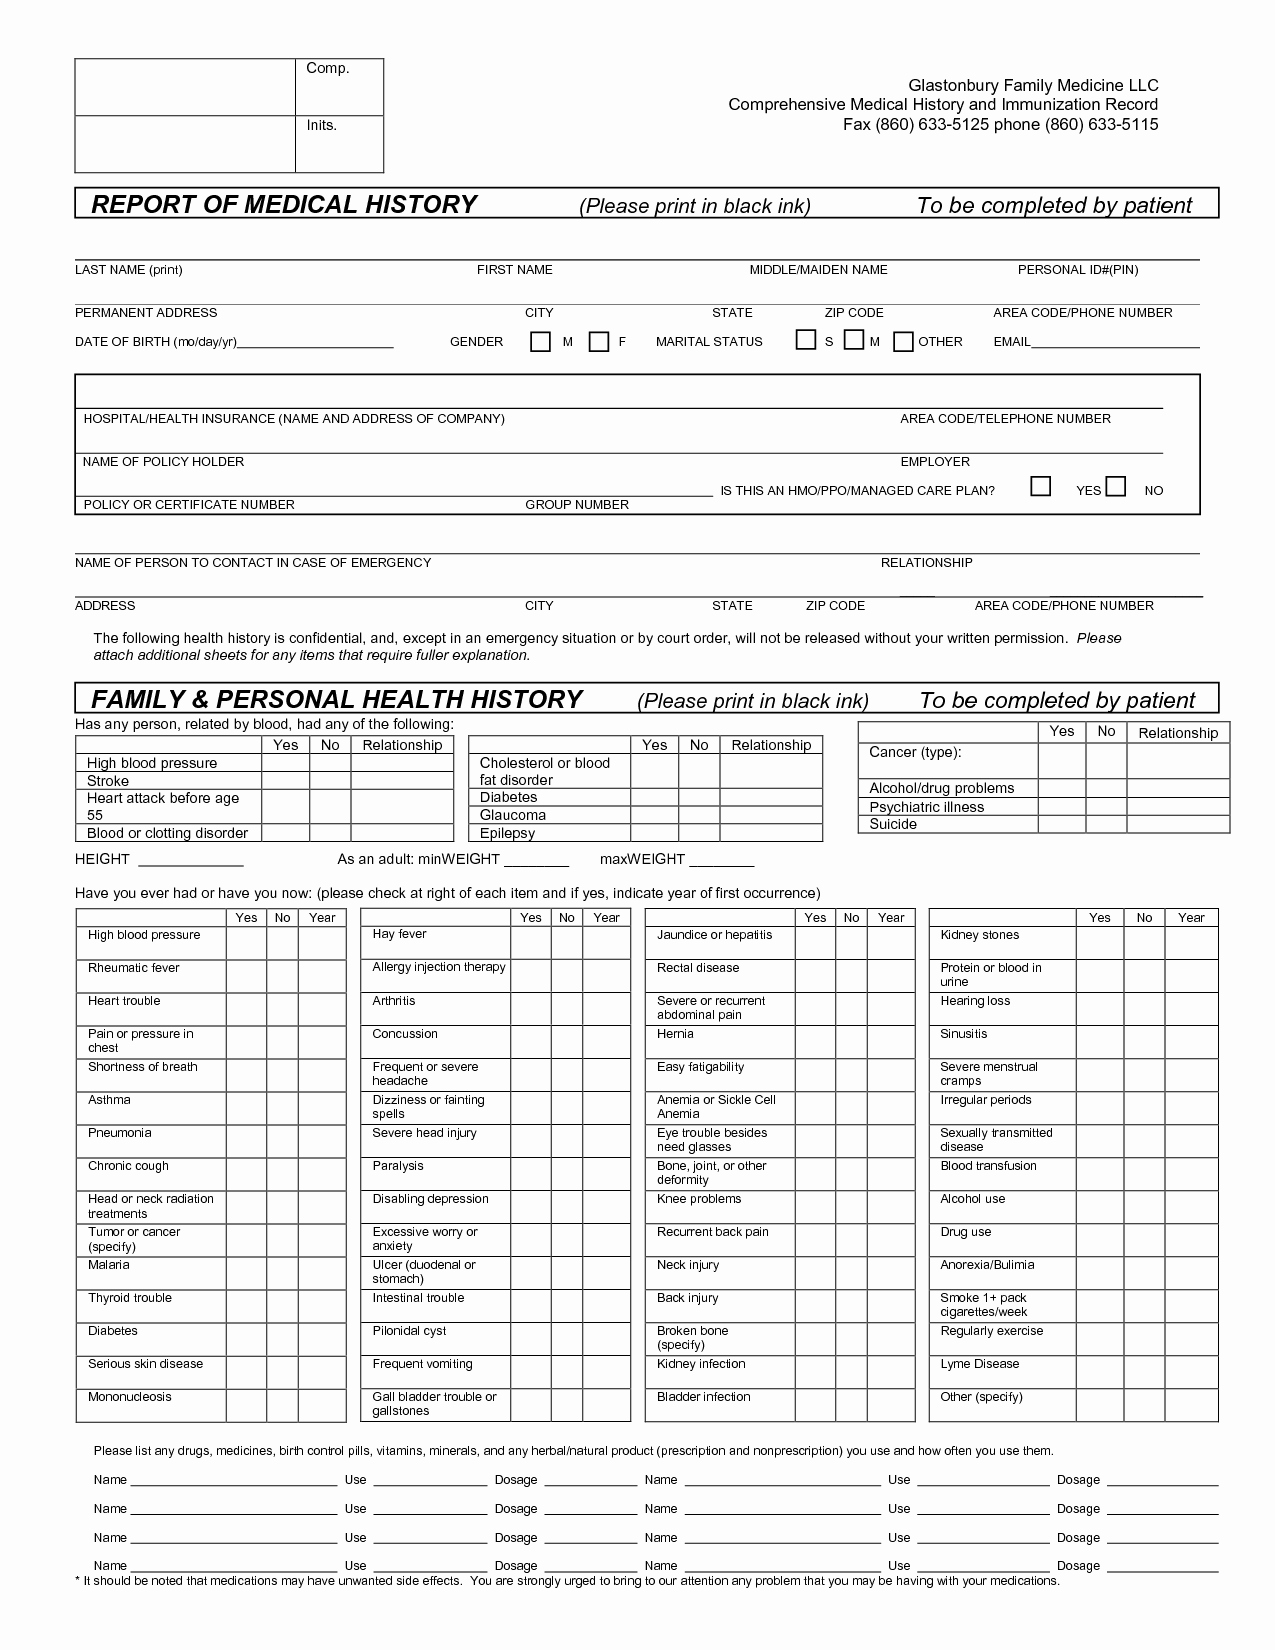 Medical History form Template Lovely Report Of Medical History Family Personal Health History